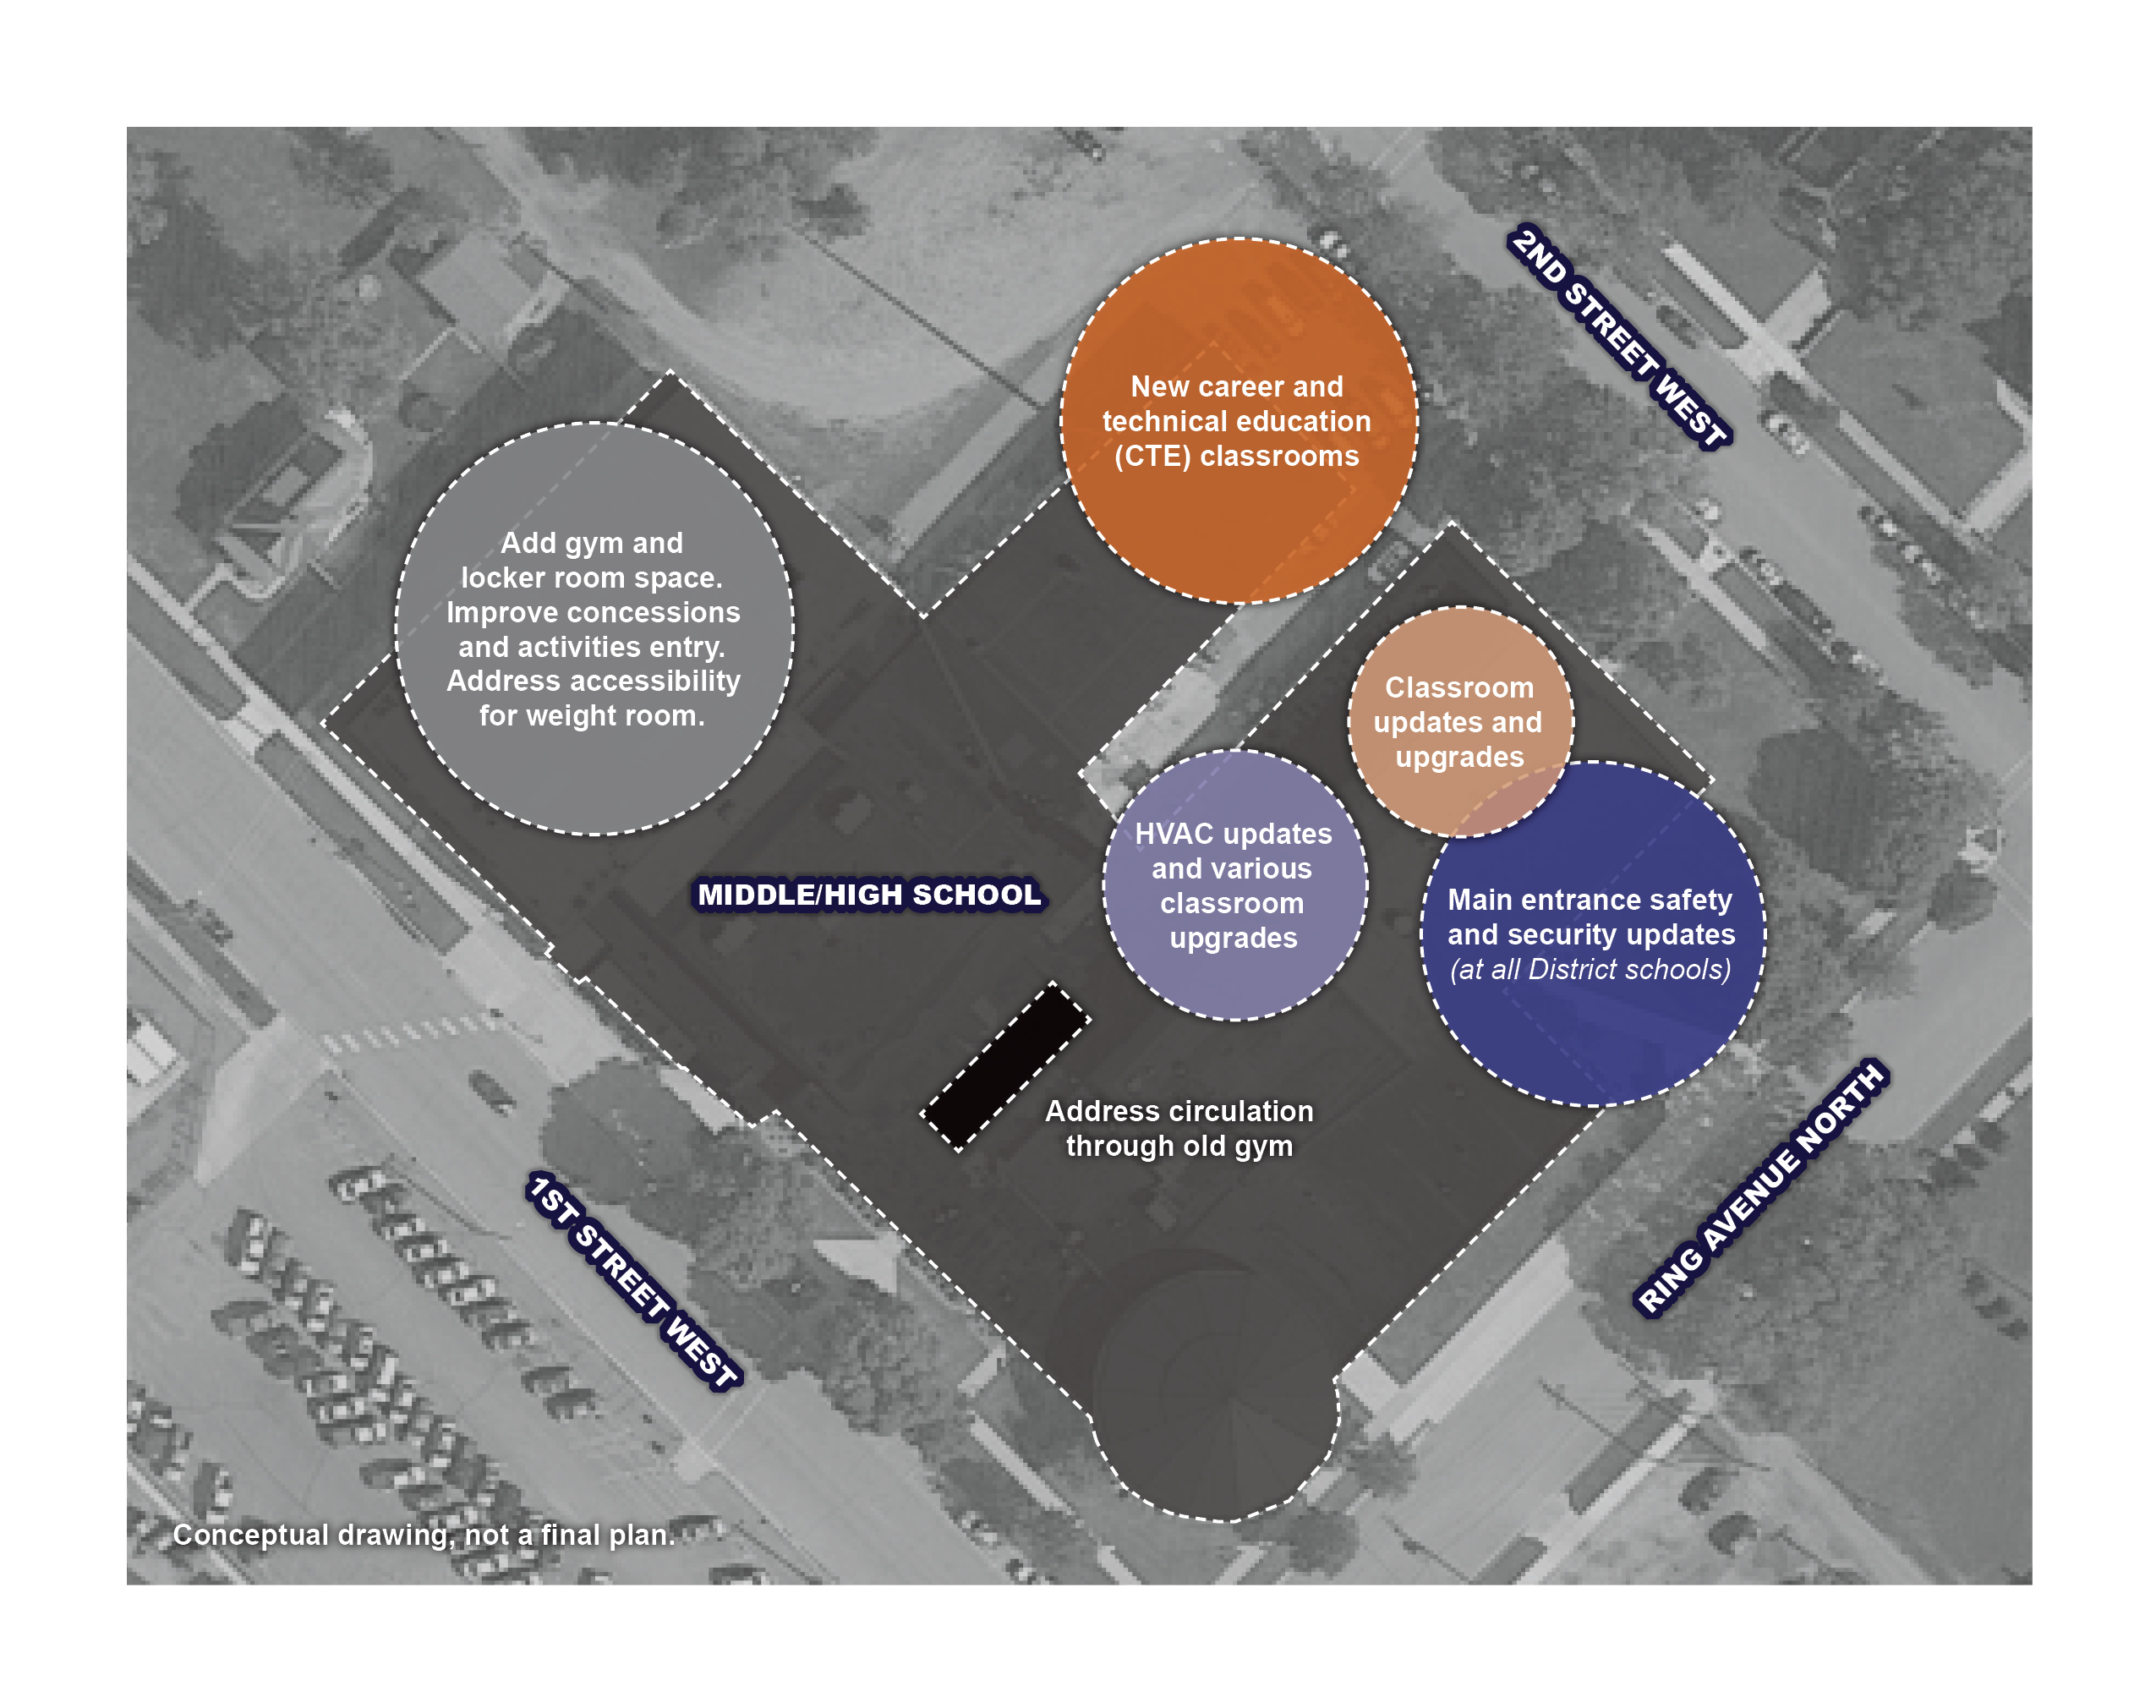 mockup of proposed changes please contact school for full info